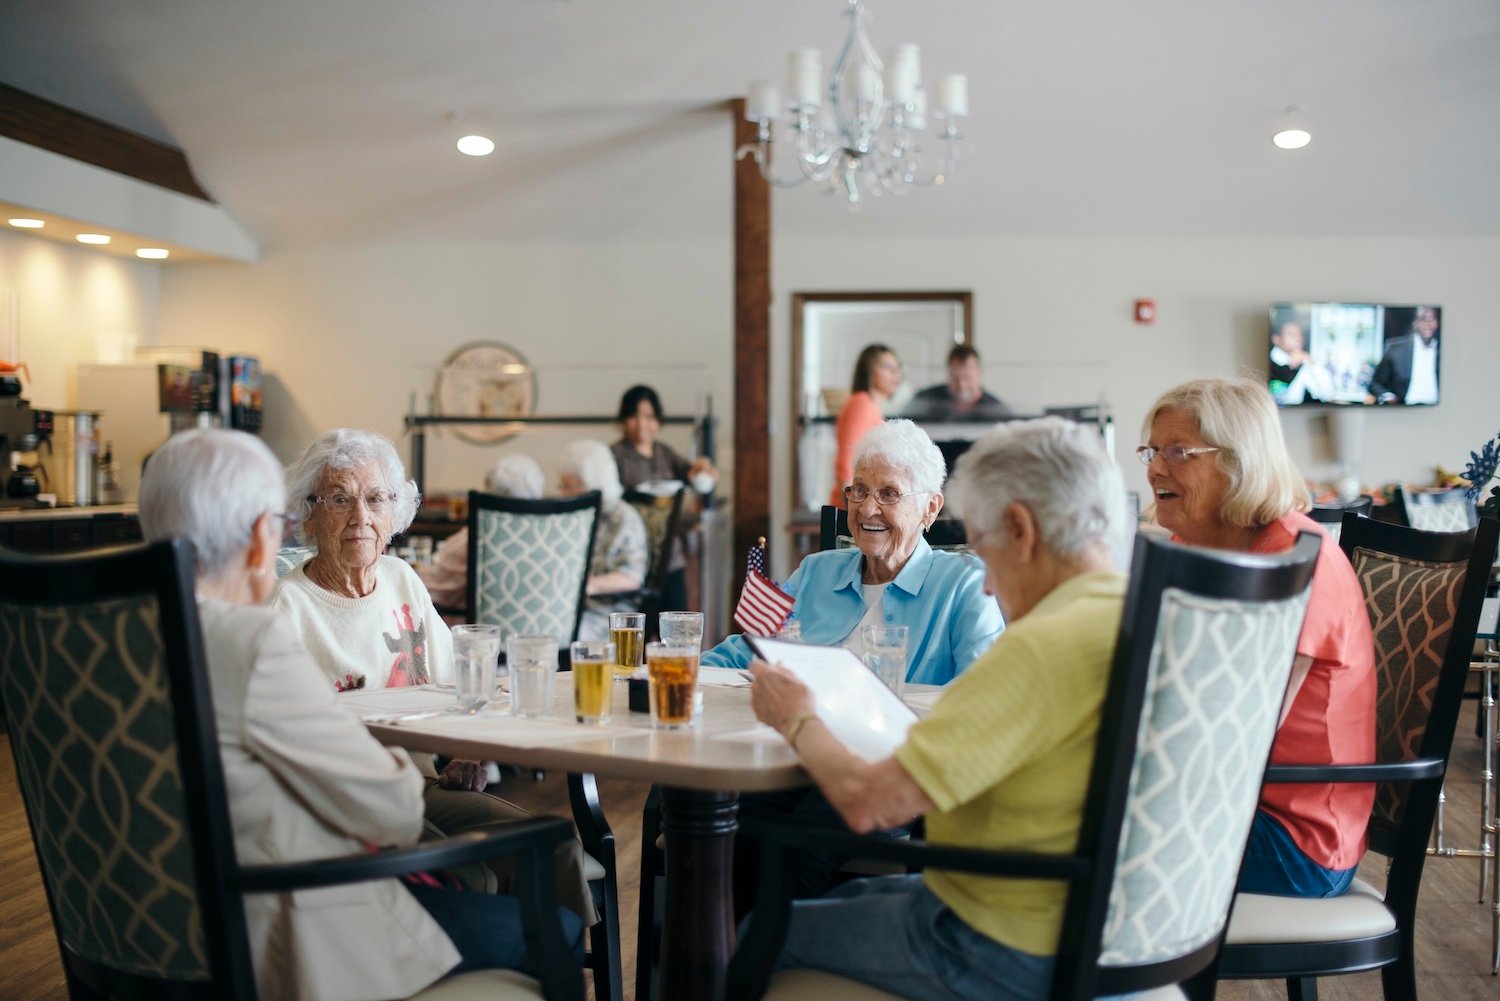 Residents dining together in a dining room